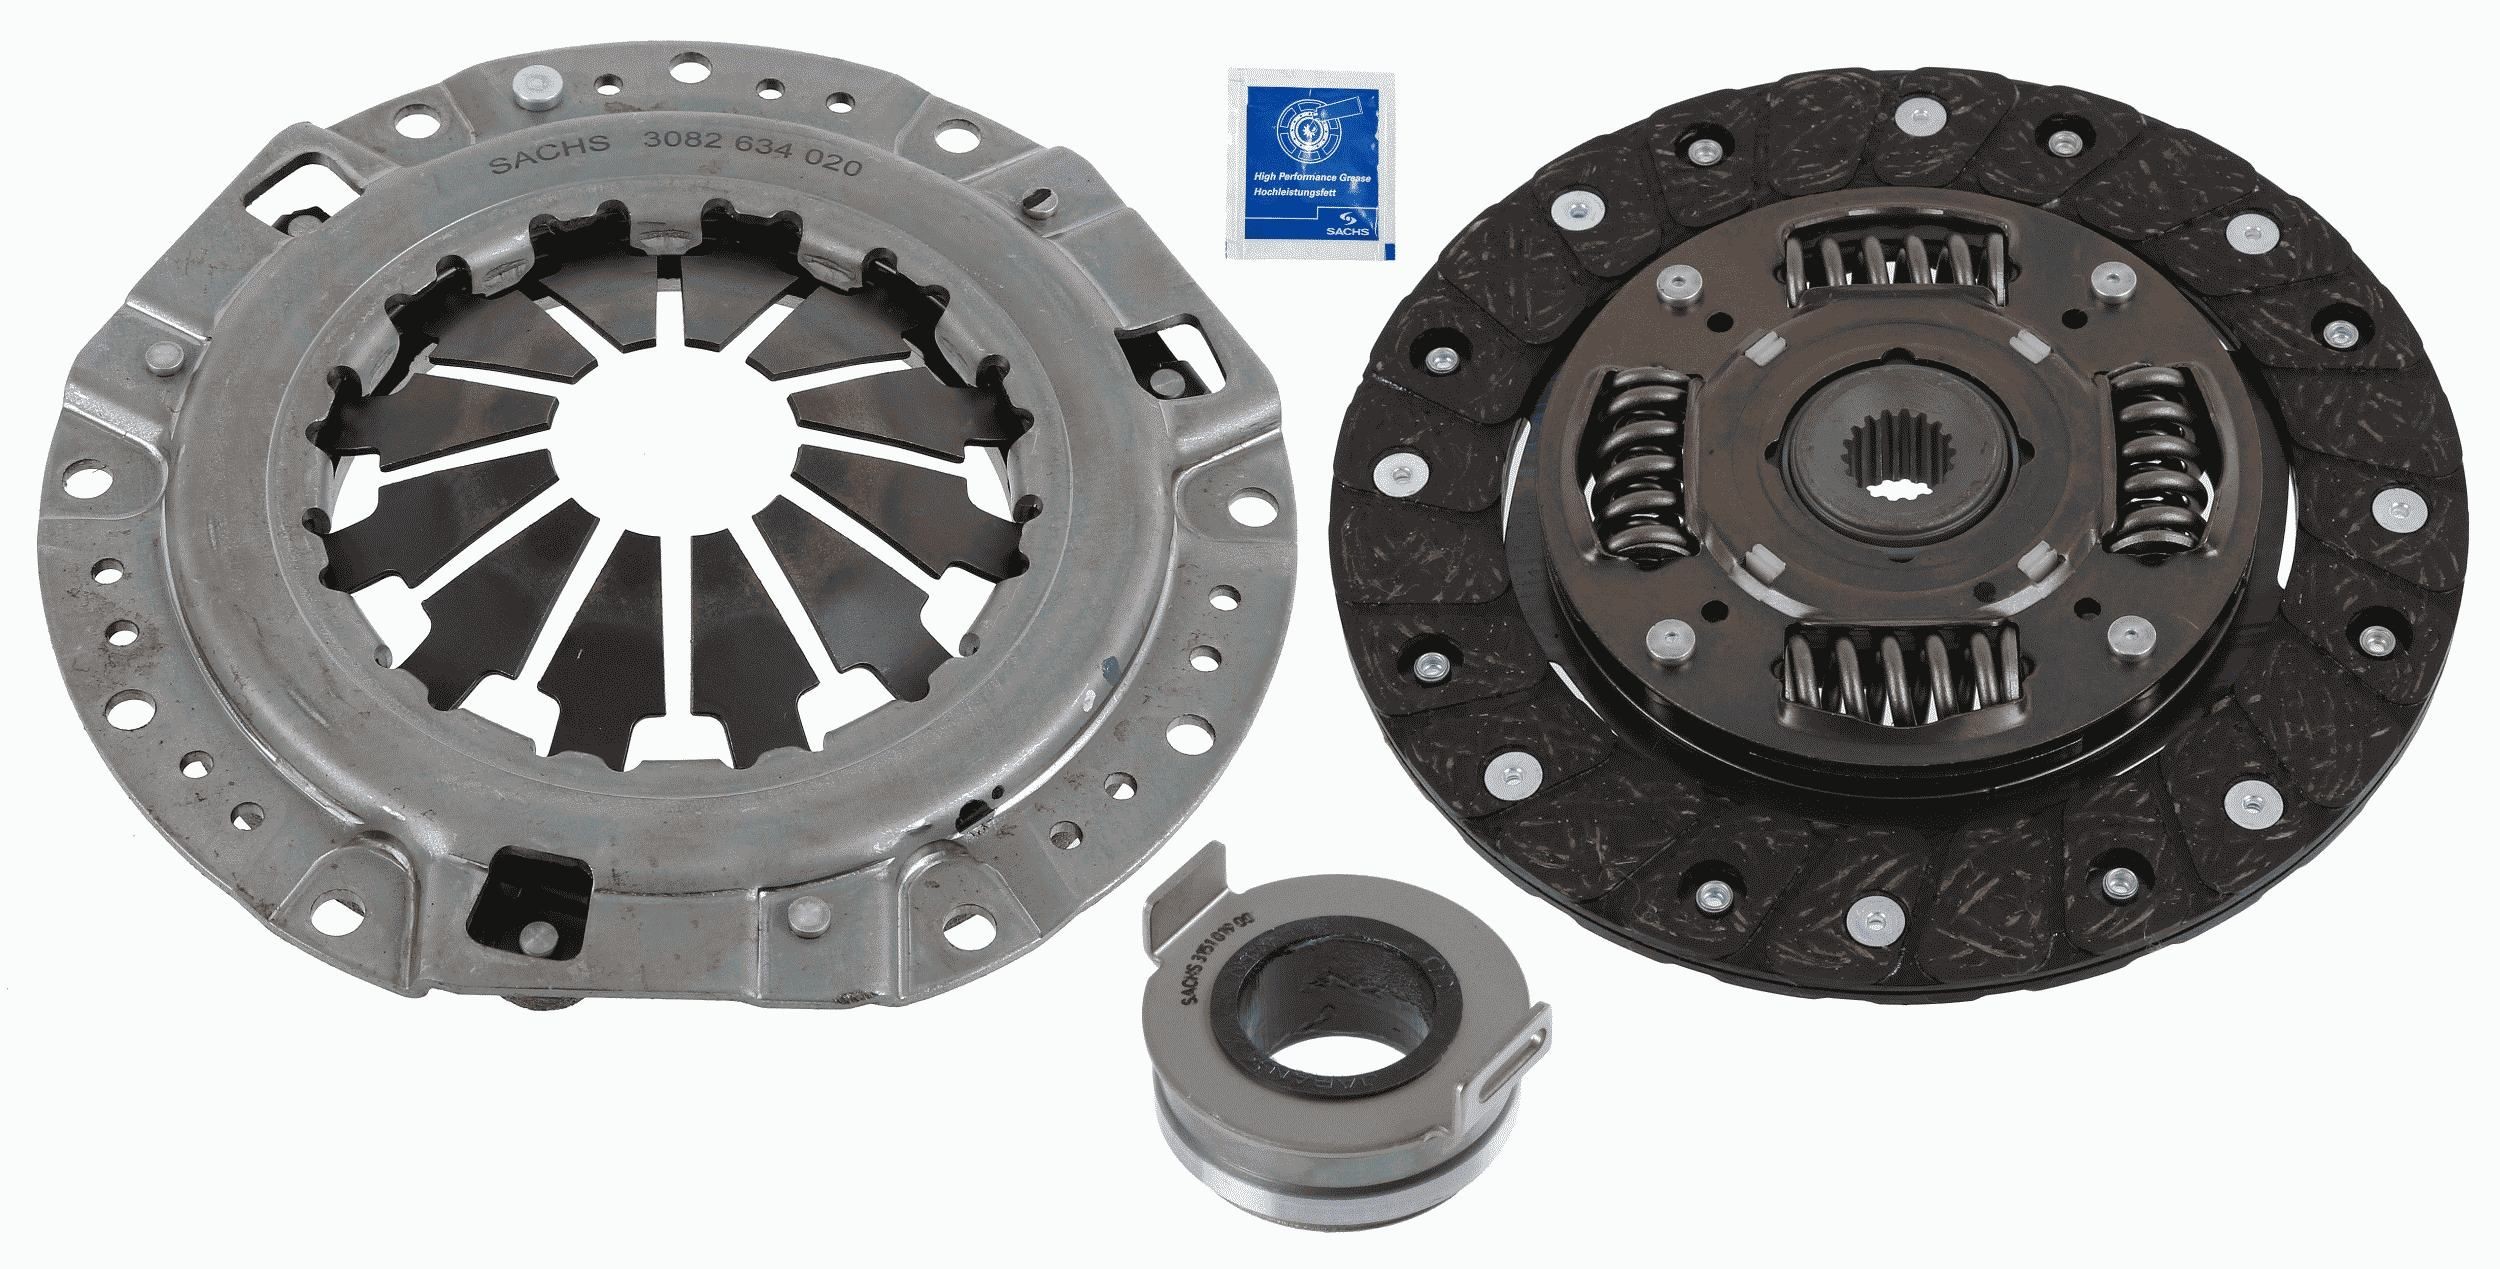 SACHS 3000 951 618 Clutch kit NISSAN experience and price